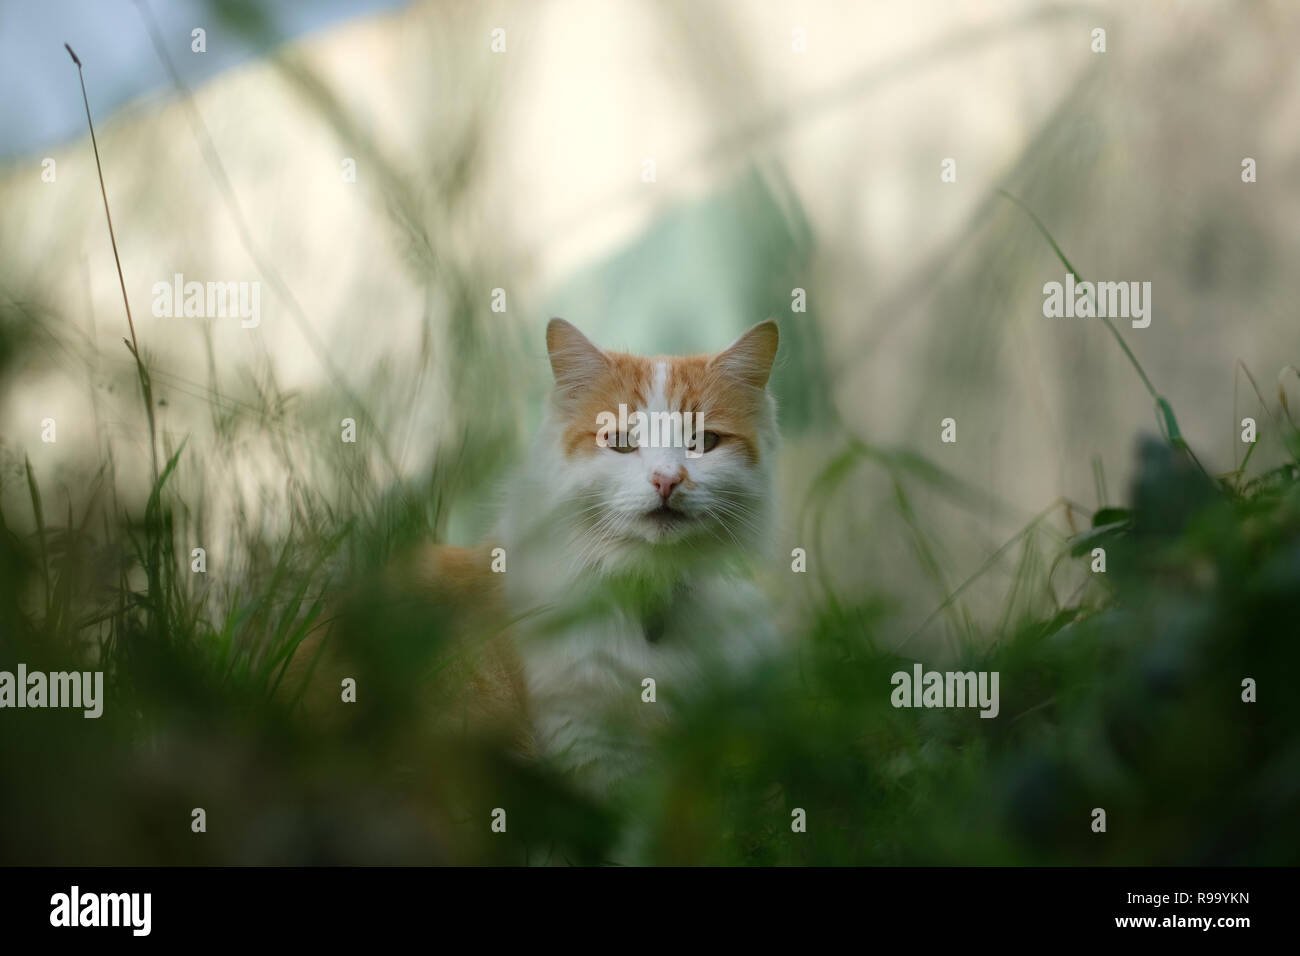 A cat sitting grass looking directly into the camera Stock Photo